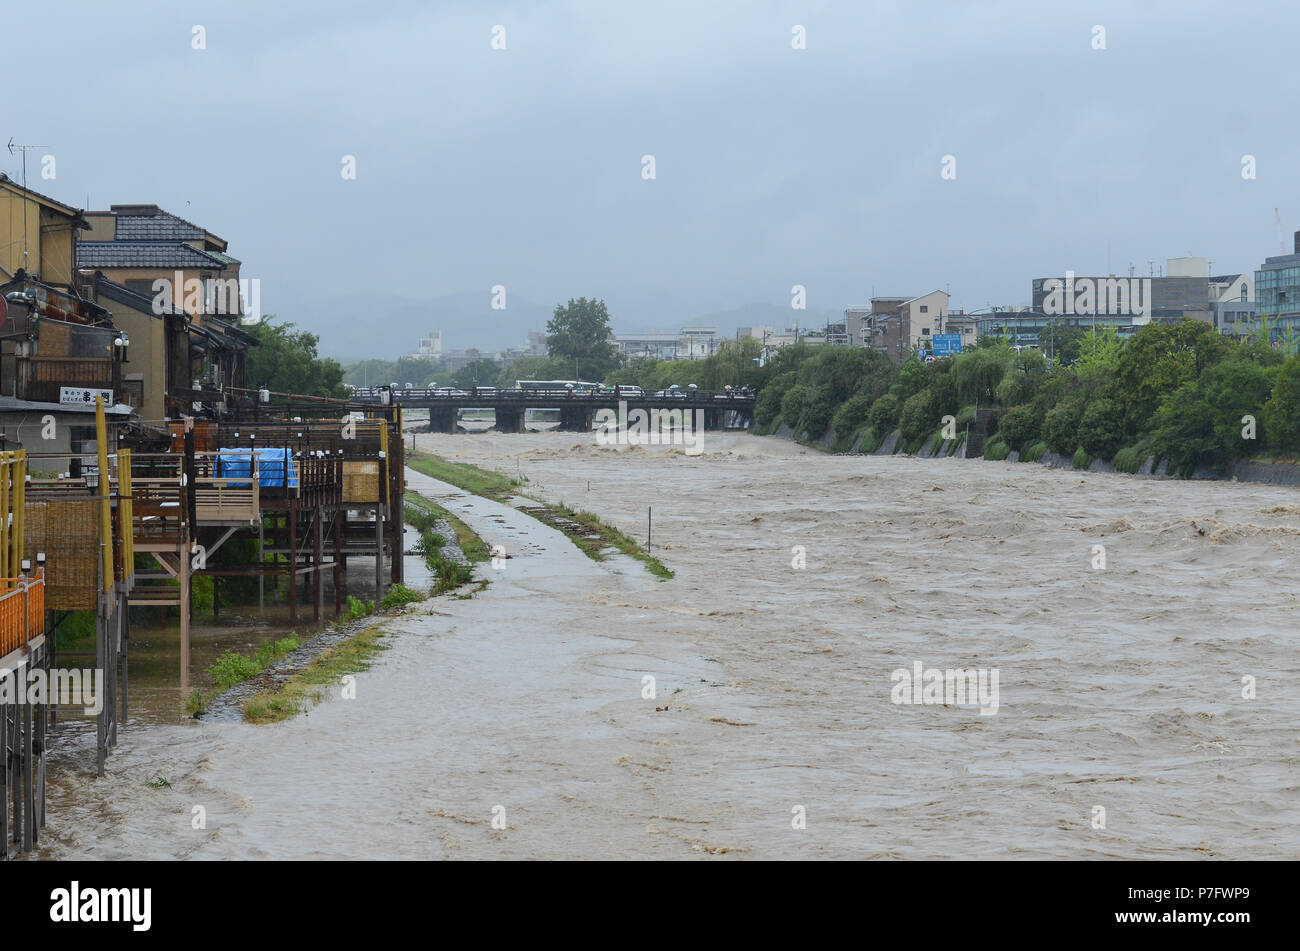 Kyoto, Japan. 6th July, 2018. Kyoto's main river, the Kamogawa, burst its banks, sending water over walkways usually busy with tourists and residents. Stock Photo